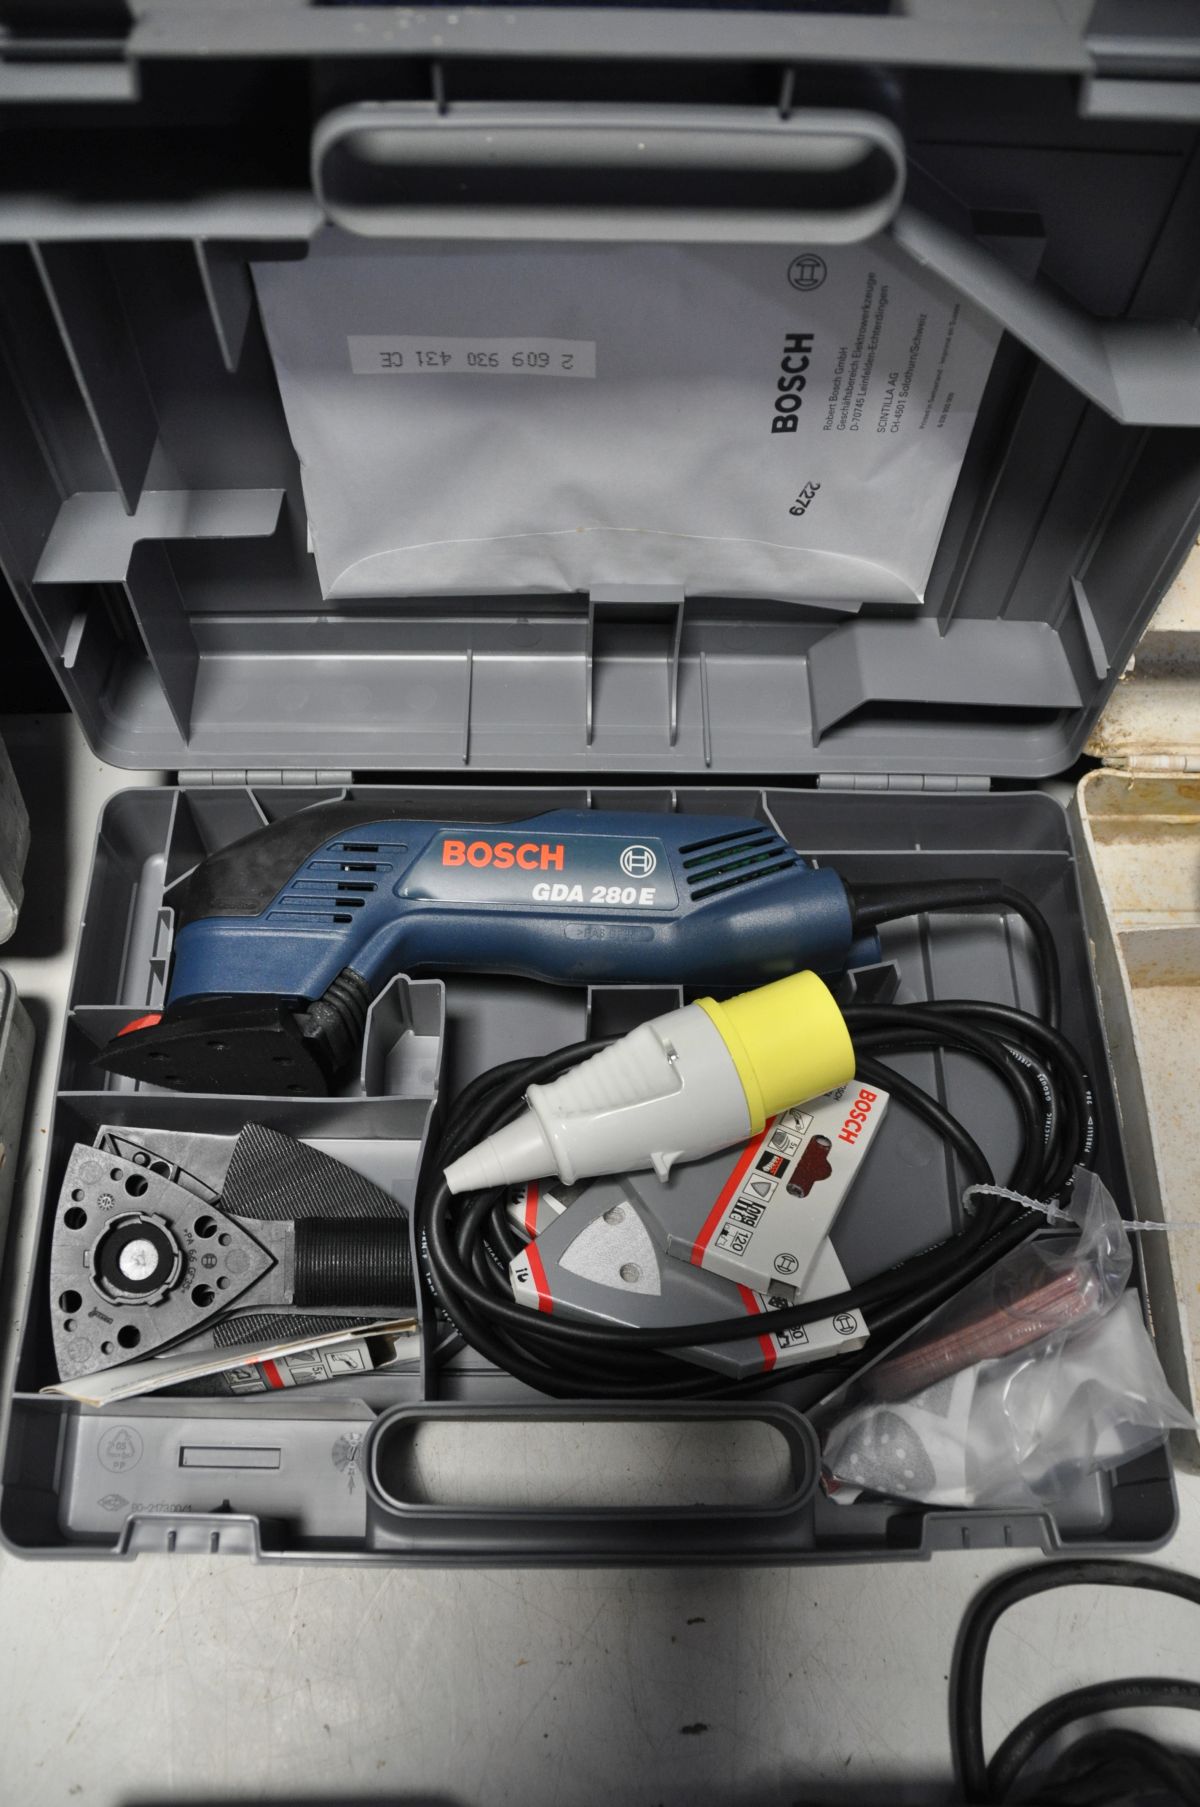 A COLLECTION OF POWERTOOLS to include a Bosch GST85 jigsaw, Bosch GDA280-E sander, Bosch - Image 3 of 5